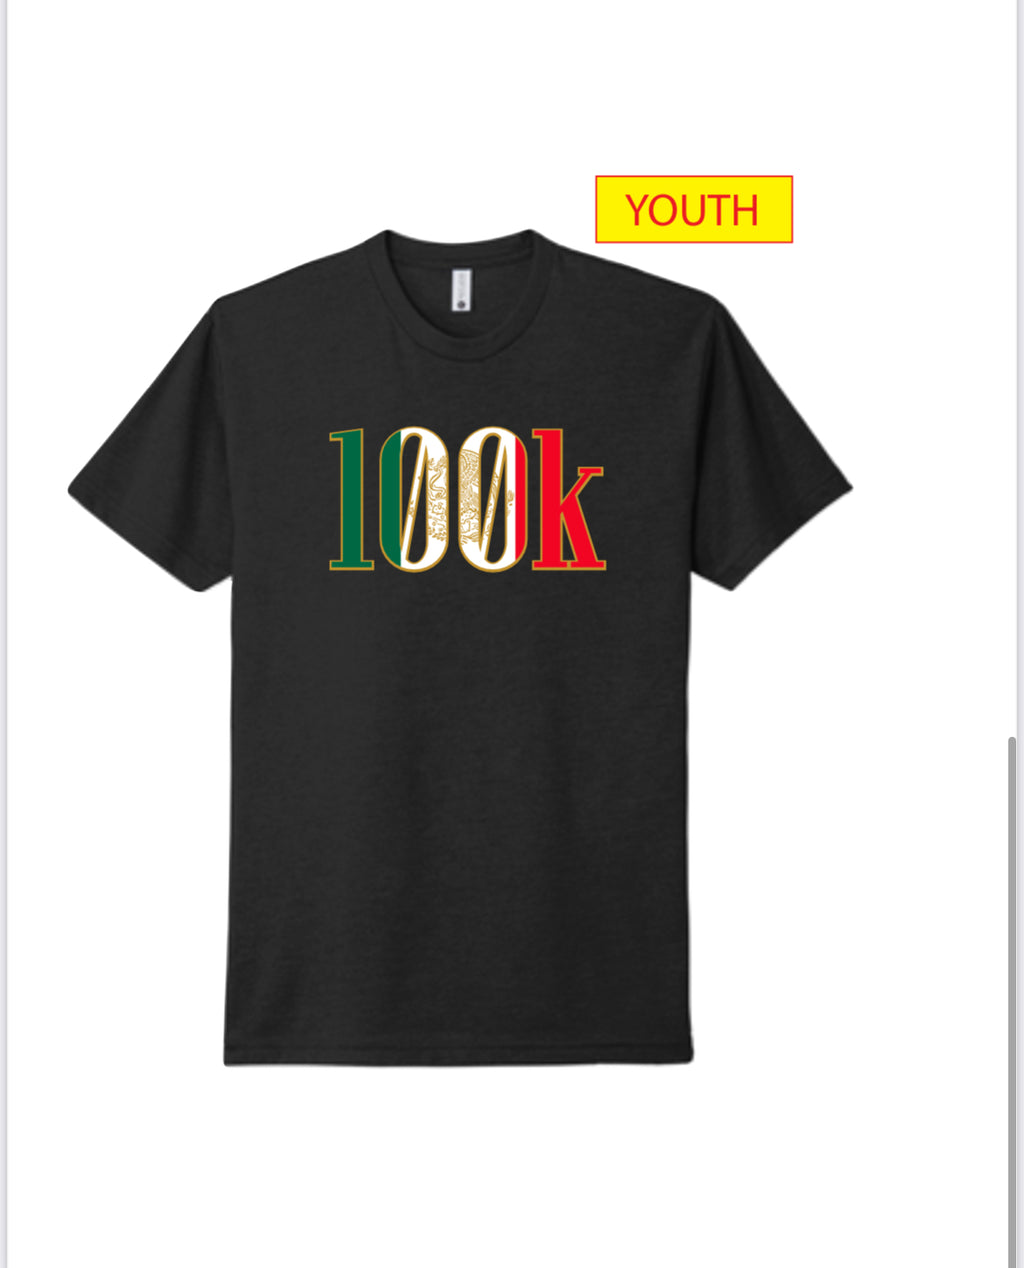 100k Mexican (Youth/kids)